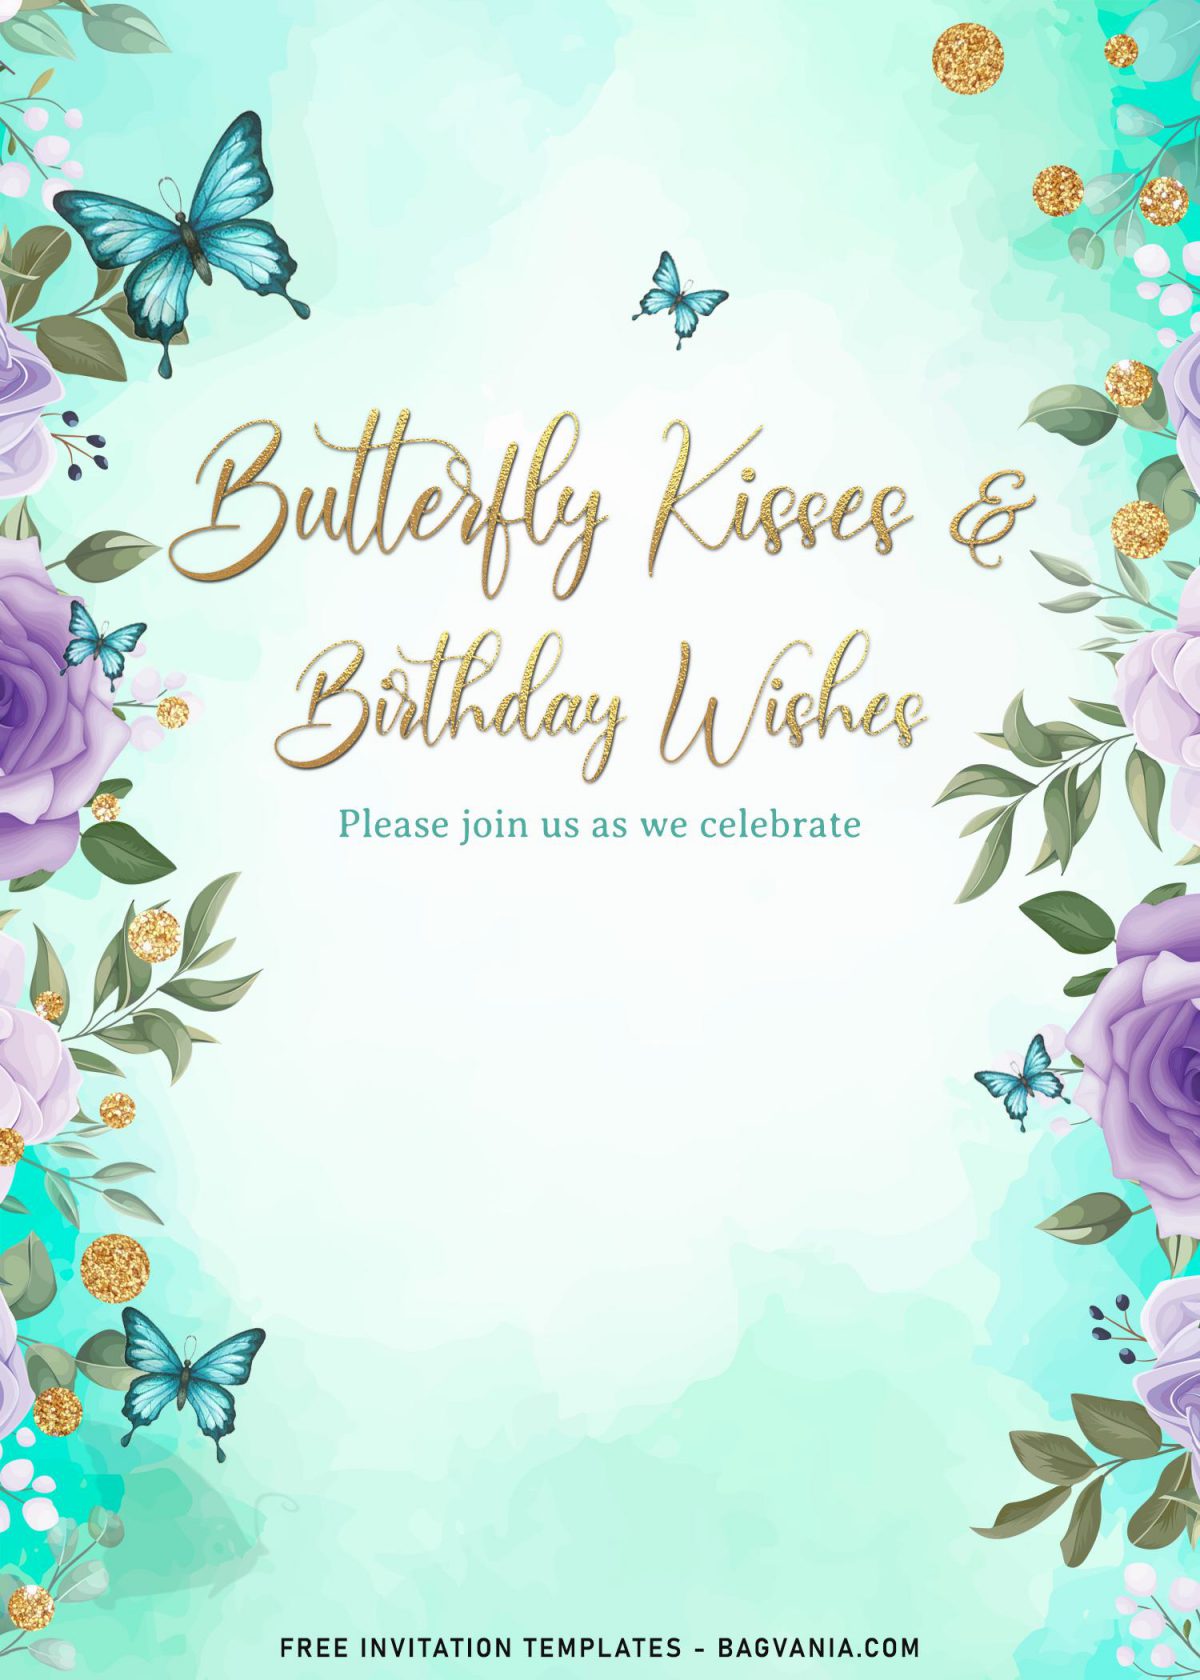 7+ Magical Watercolor Butterfly Birthday Invitation Templates and has custom floral border